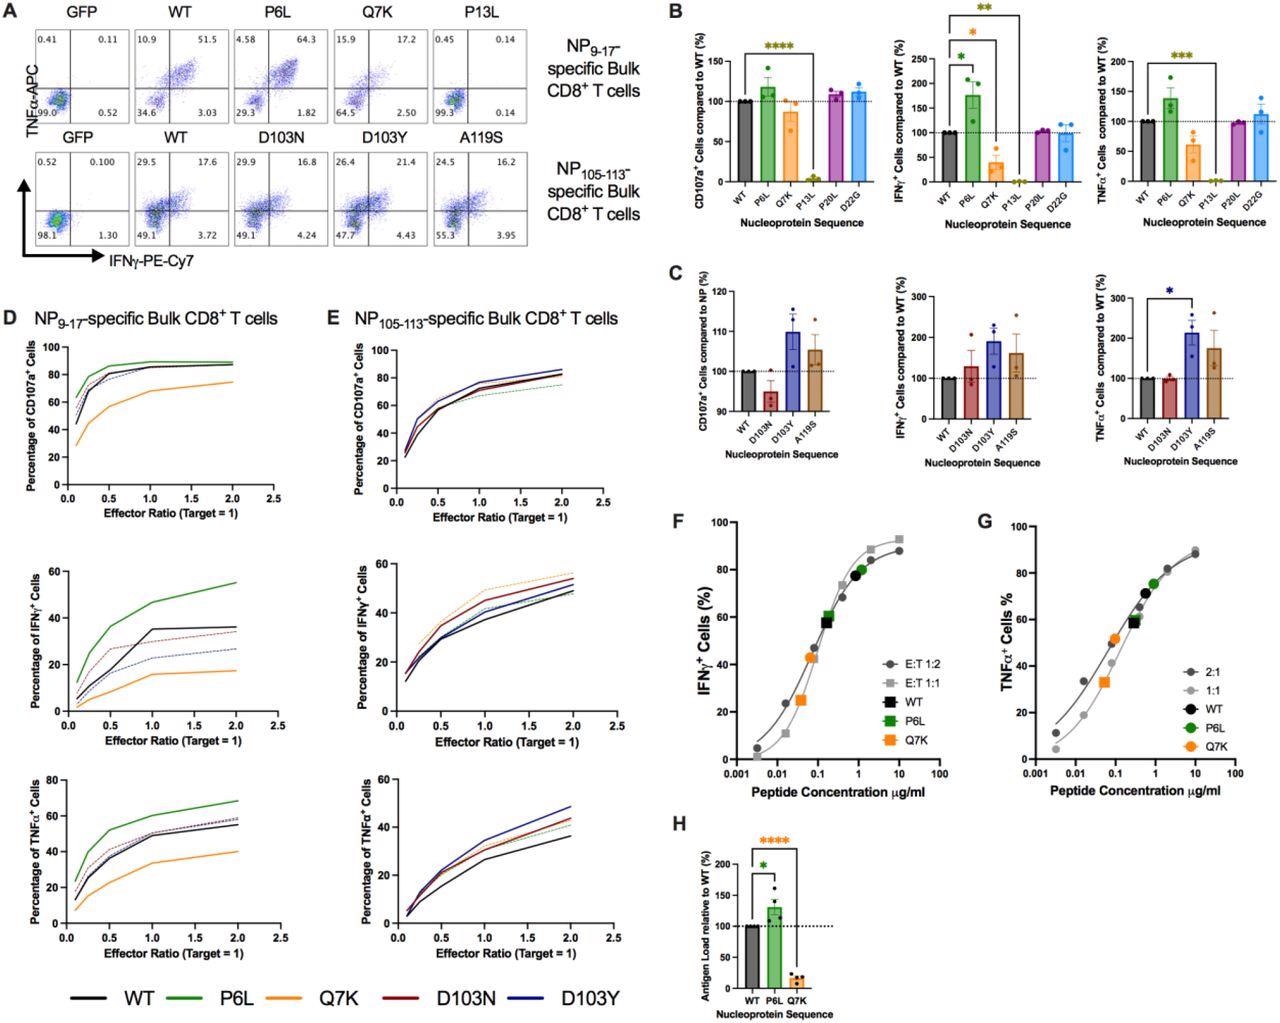 Mutations in flanking regions of epitopes alter CD8+ T Cell responses, (A) Intracellular cytokine staining of NP9-17 or NP105-113 epitope-specific bulk CD8+ T cells following incubation with GFP-or NP-transduced B cells. (B) CD8+ T Cell responses to mutations flanking NP9-17 were analyzed by flow cytometry at an E:T ratio of 2:1. (C) CD8+ T Cell responses to mutations flanking NP105-113 were analyzed by flow cytometry at an E:T ratio of 2:1. (D-E) Selected mutations were investigated in more detail by altering the E:T ratio from 2:1 to 0.1:1. (F) IFNγ titration curve in response to NP9-17 epitope peptide for NP9-17-specific bulk CD8+ T cells with NP-transduced B cell responses overlaid. (G) TNFα titration curve in response to NP9-17 epitope peptide for NP9- 17-specific bulk CD8+ T cells with NP-transduced B cell responses overlaid. (H) Estimated peptide load values were normalized to WT-NP levels. Data is presented as mean ±SEM and was analyzed by one-way ANOVA and Dunnett’s multiple comparisons test. *p<0.05, **p<0.01, ***p<0.001, ****p<0.0001.